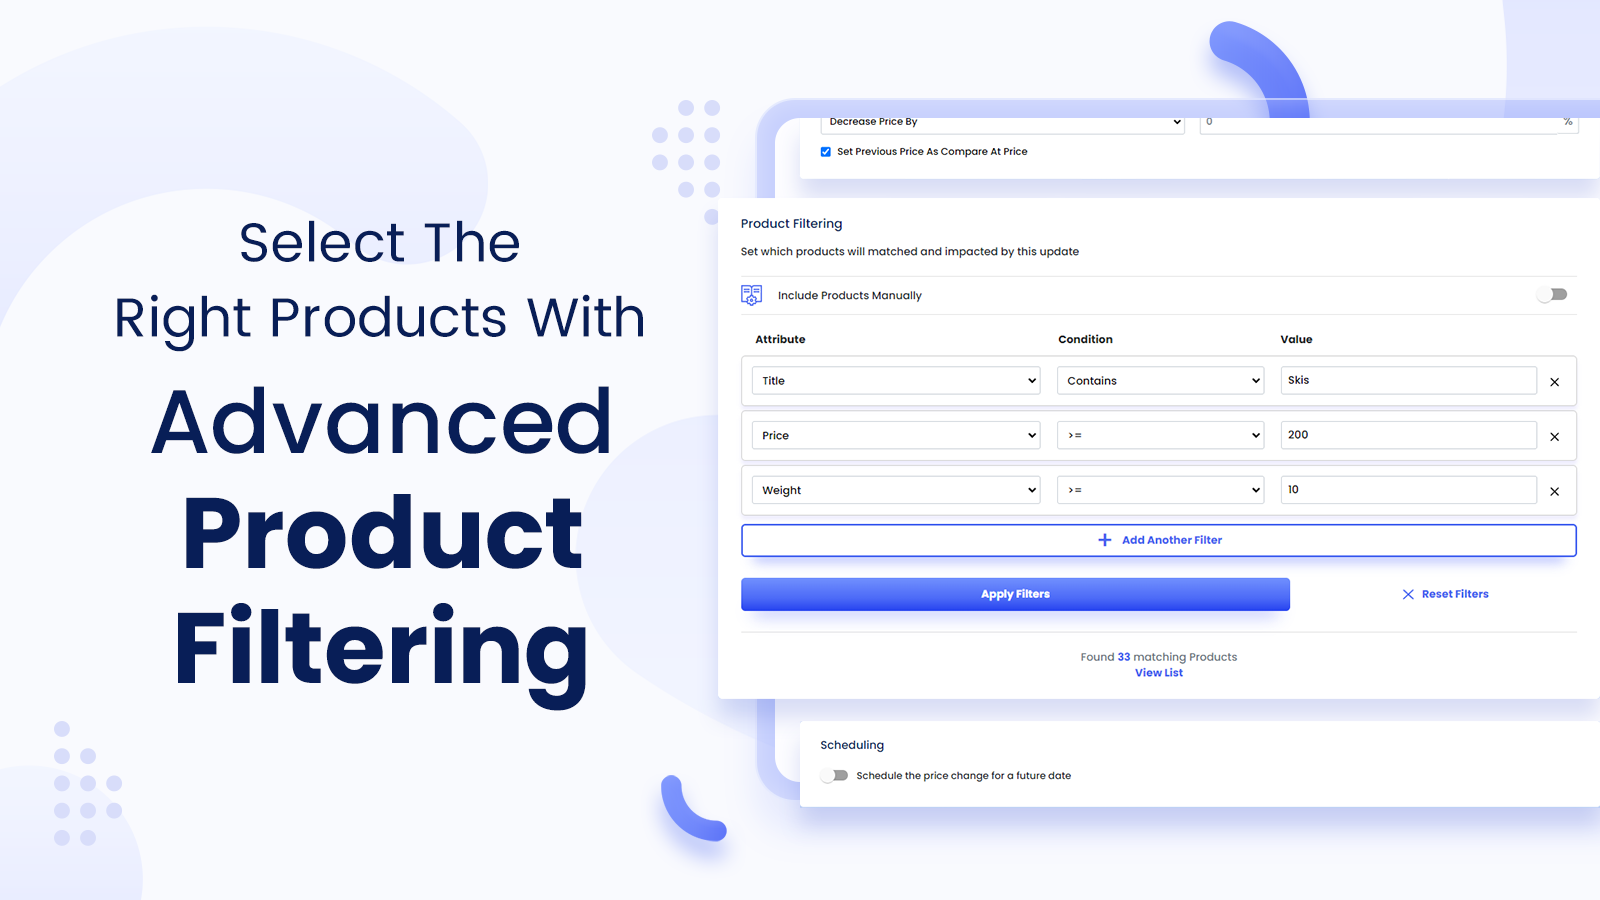 Select The Right Products With Advanced Product Filtering